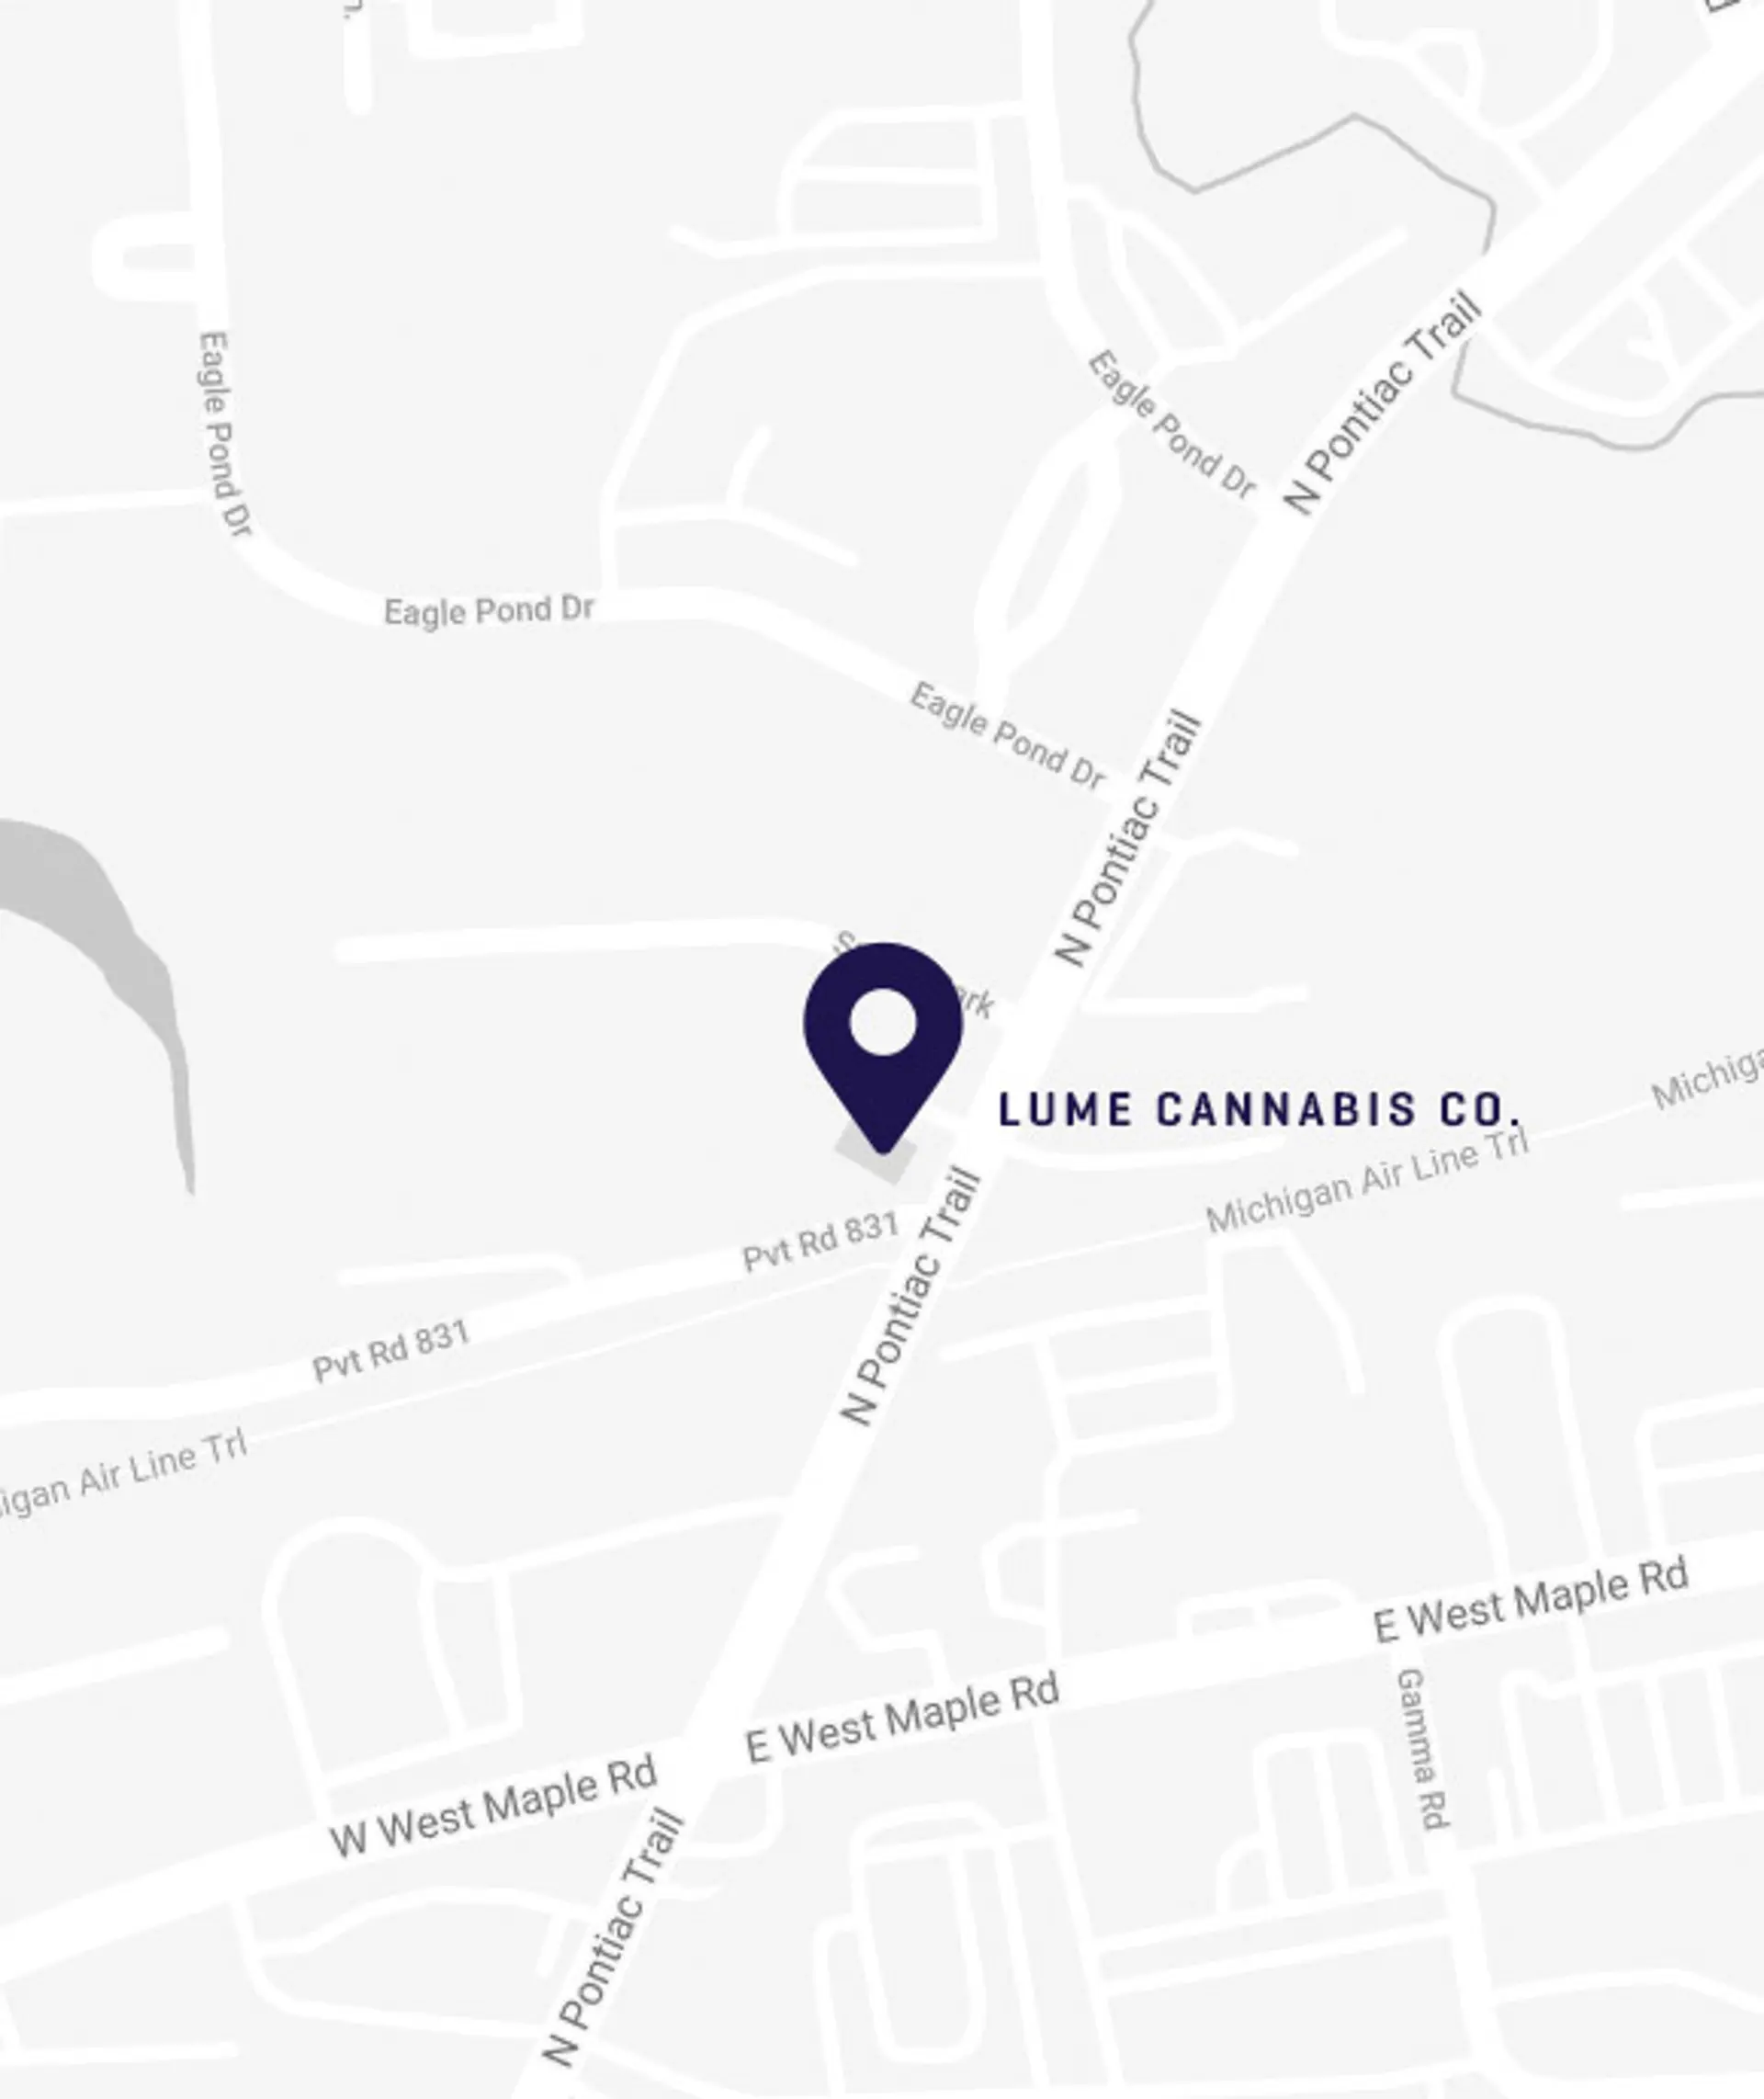 Location of Lume Cannabis dispensary in Walled Lake, MI